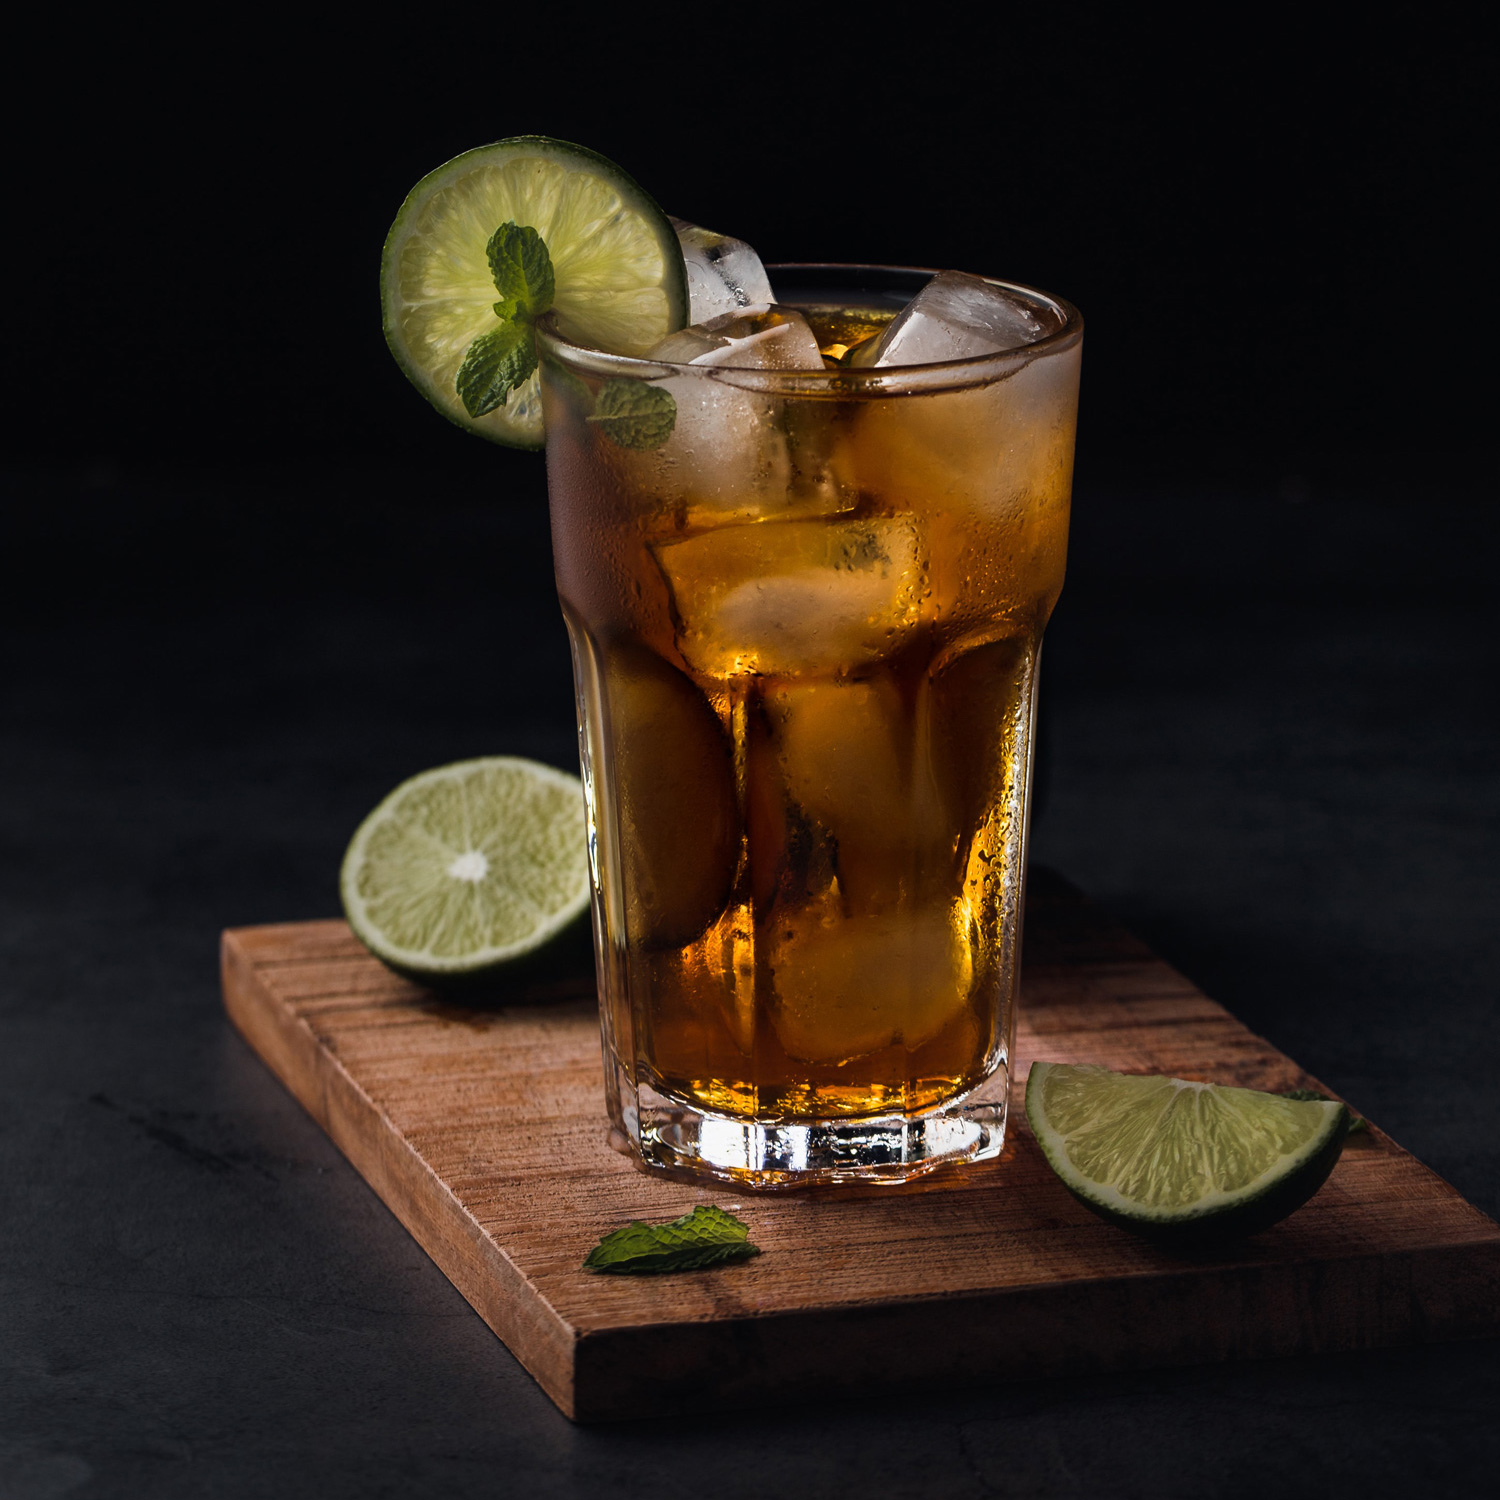 How to Make a Classic Tea Cocktail?